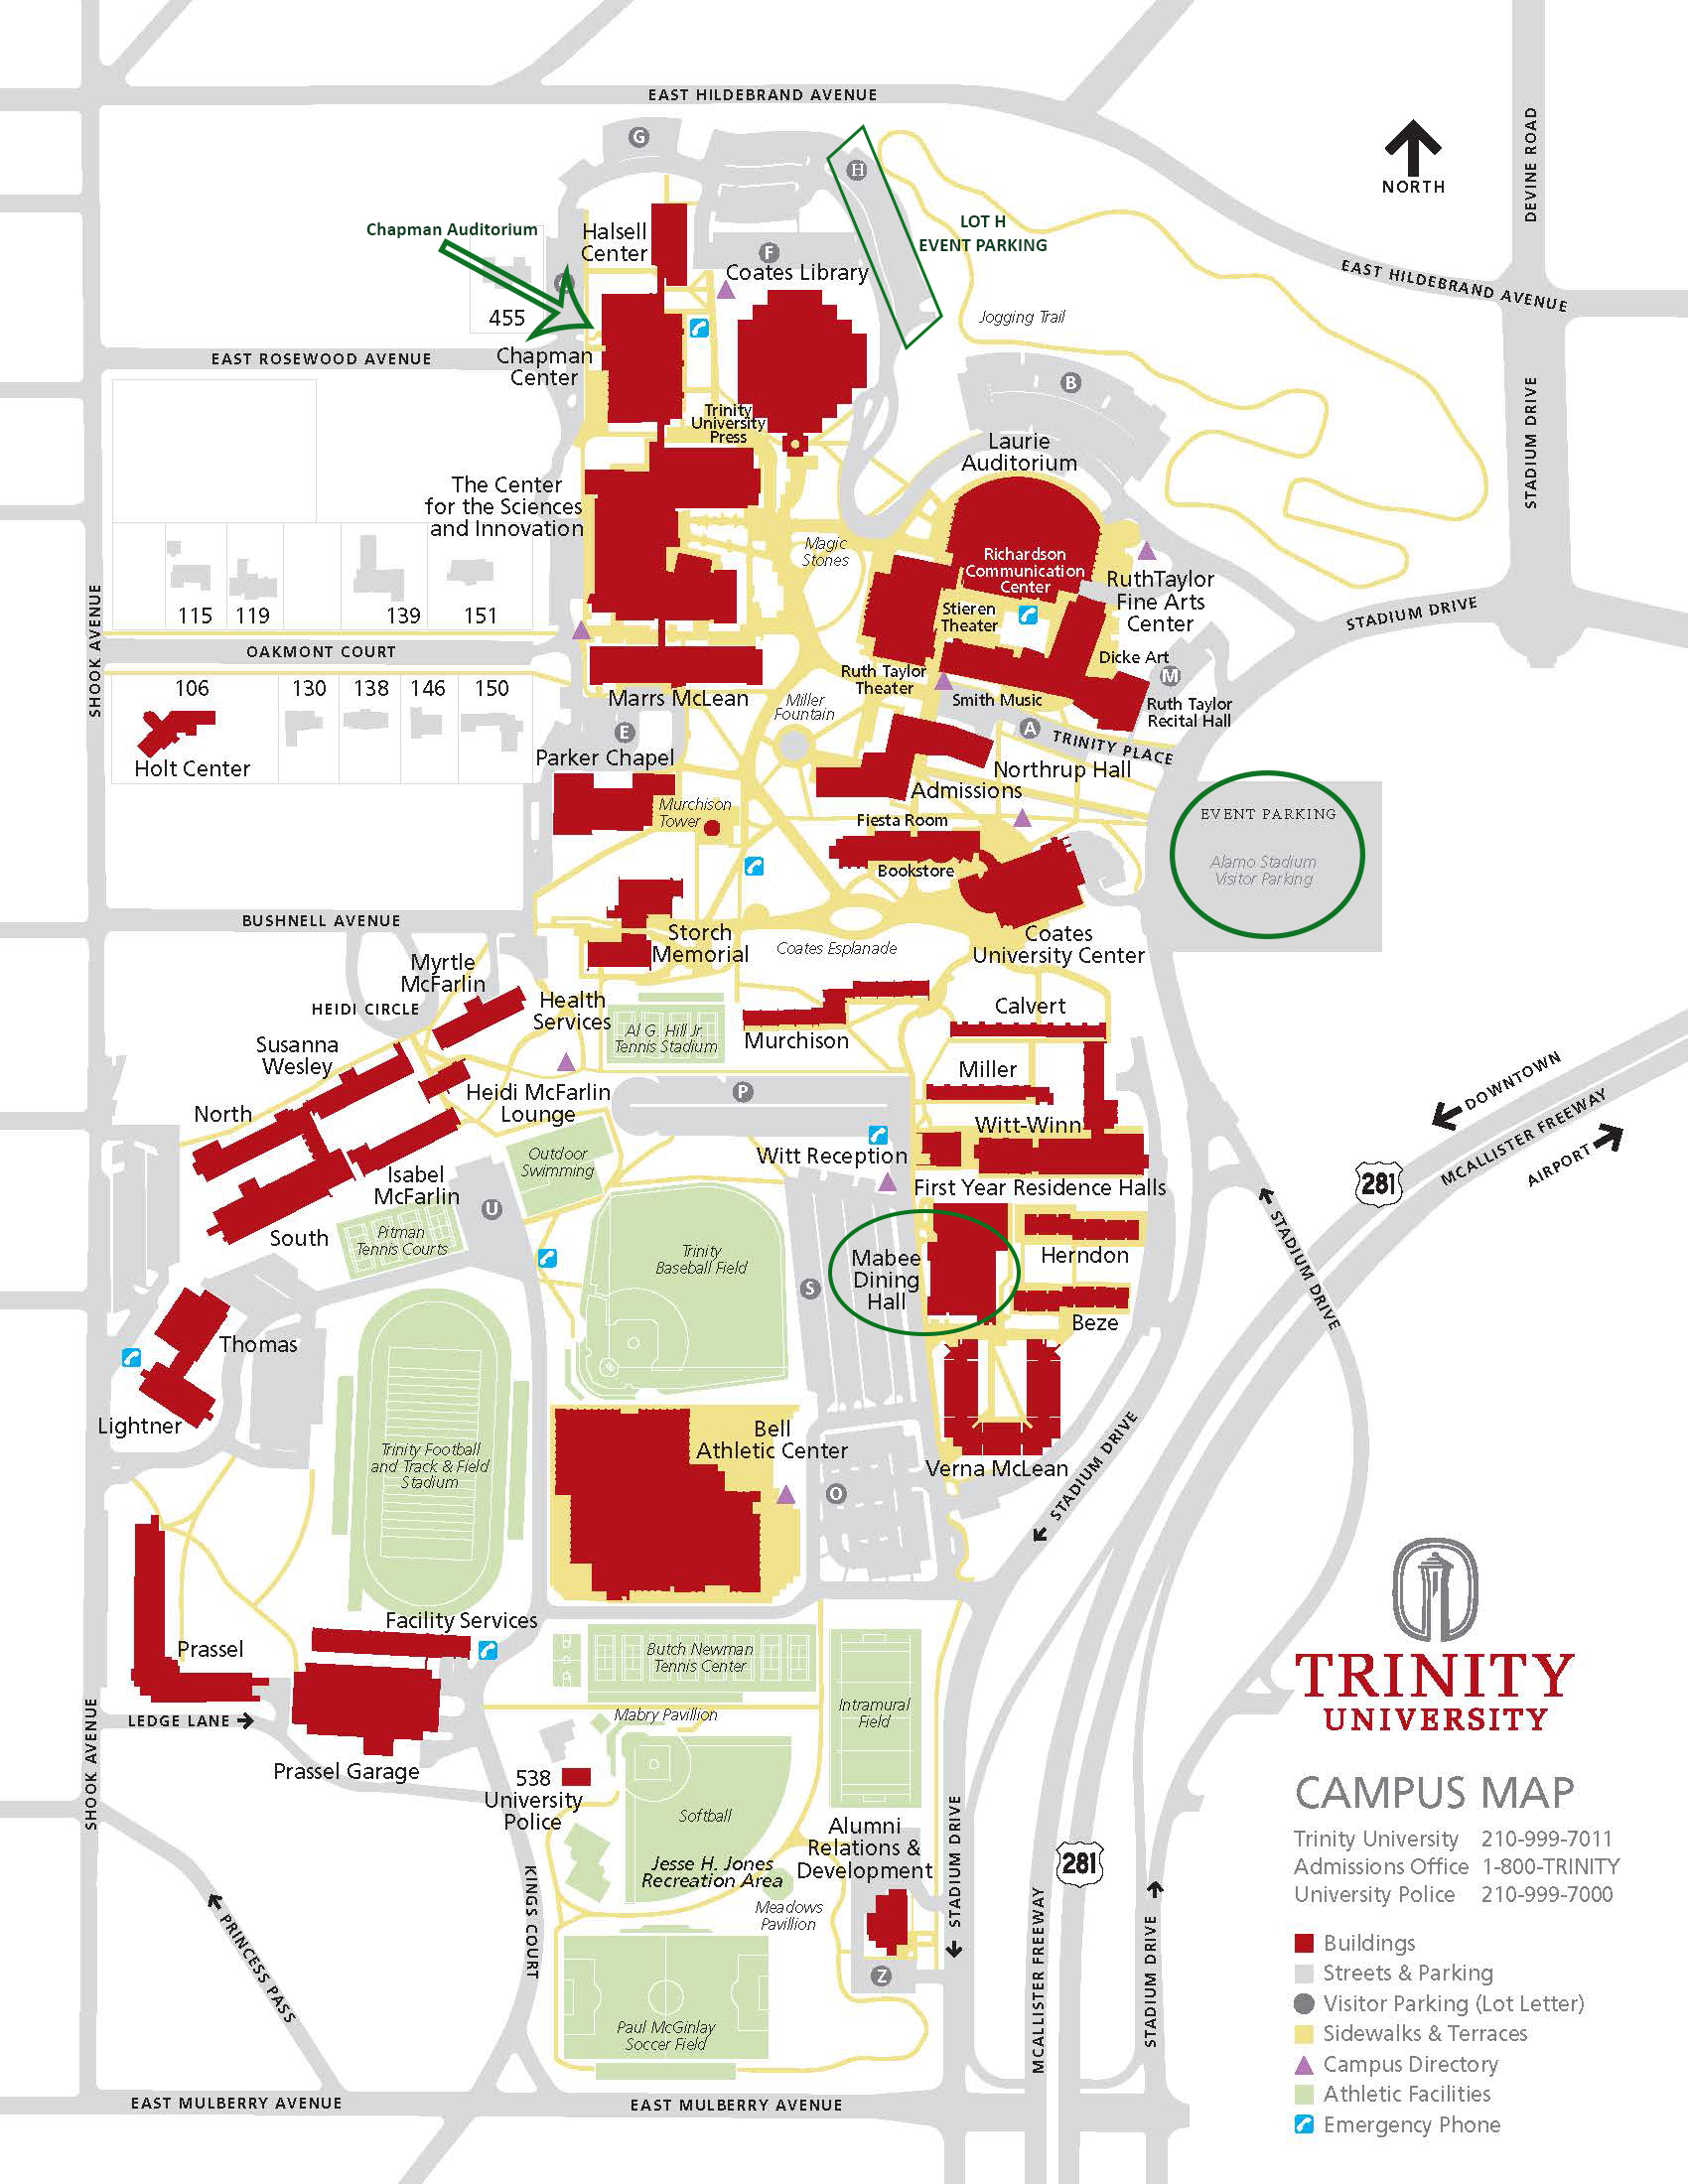 Map of the Trinity University campus. Chapman Auditorium is located near Lot H Event Parking, and next to Halsell Center and the Center for the Sciences and Innovation at Rosewood Avenue near the northwestern corner of campus.